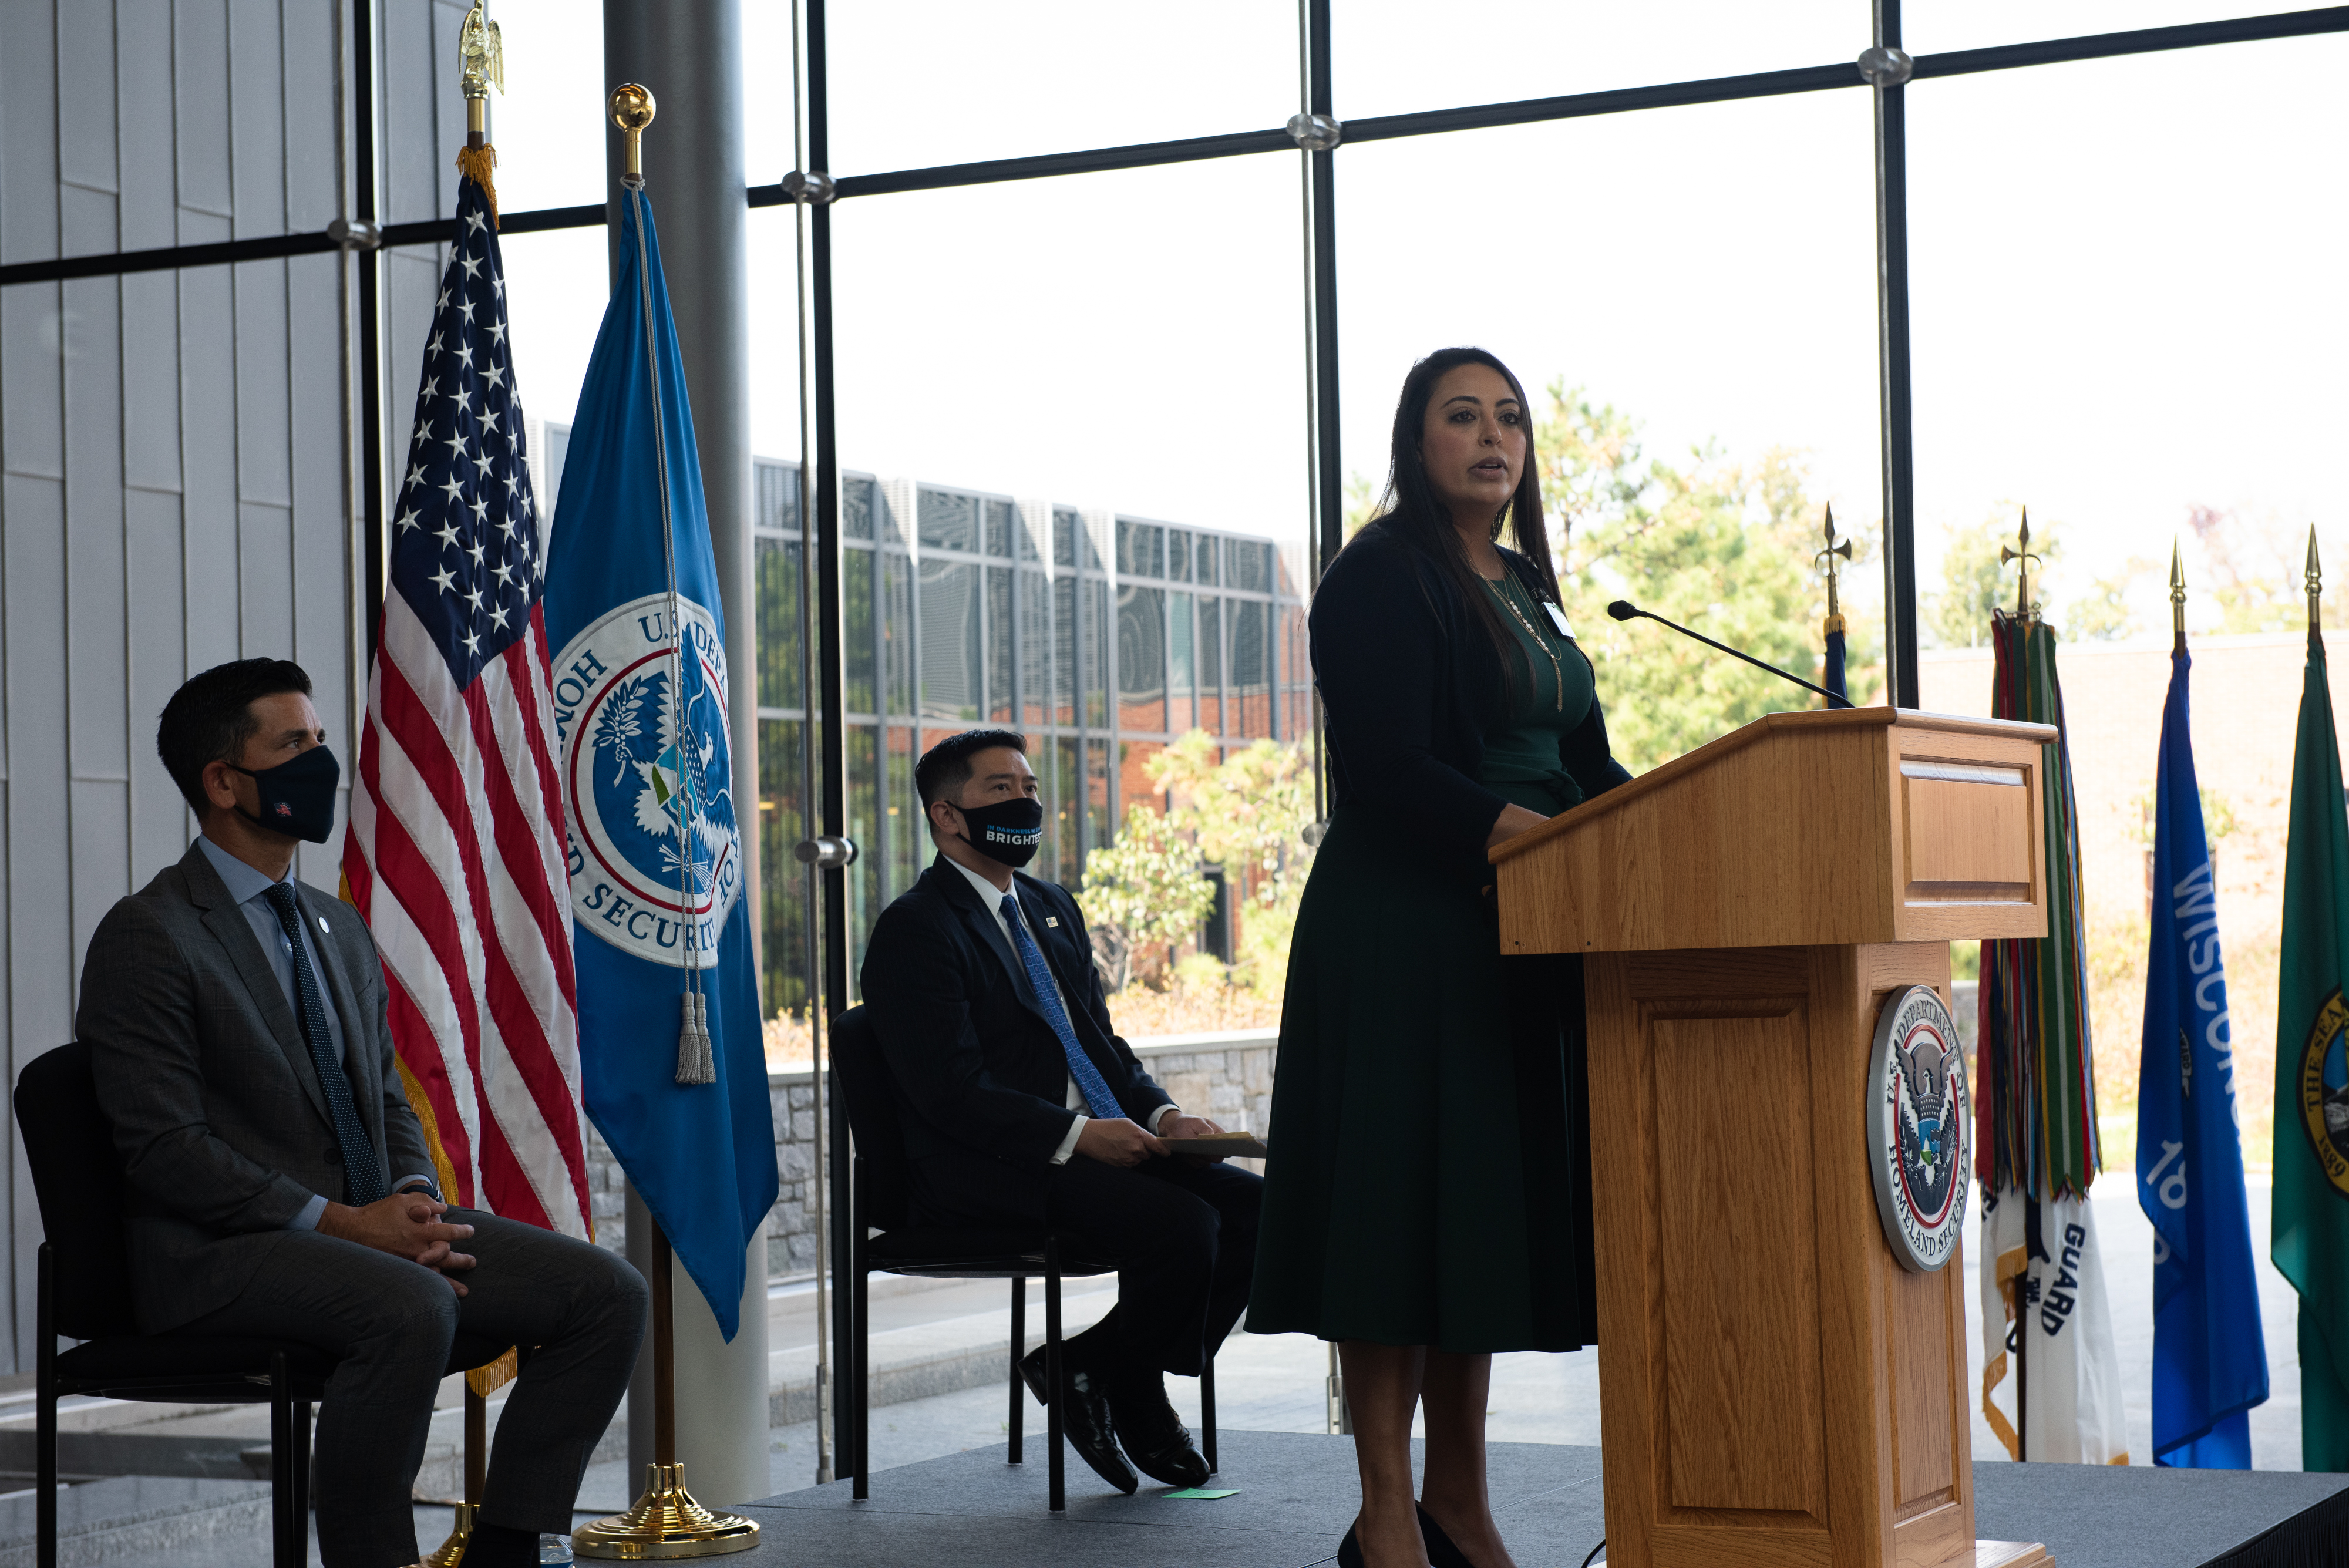 DHS launched the Center for Countering Human Trafficking (CCHT) in October 2020